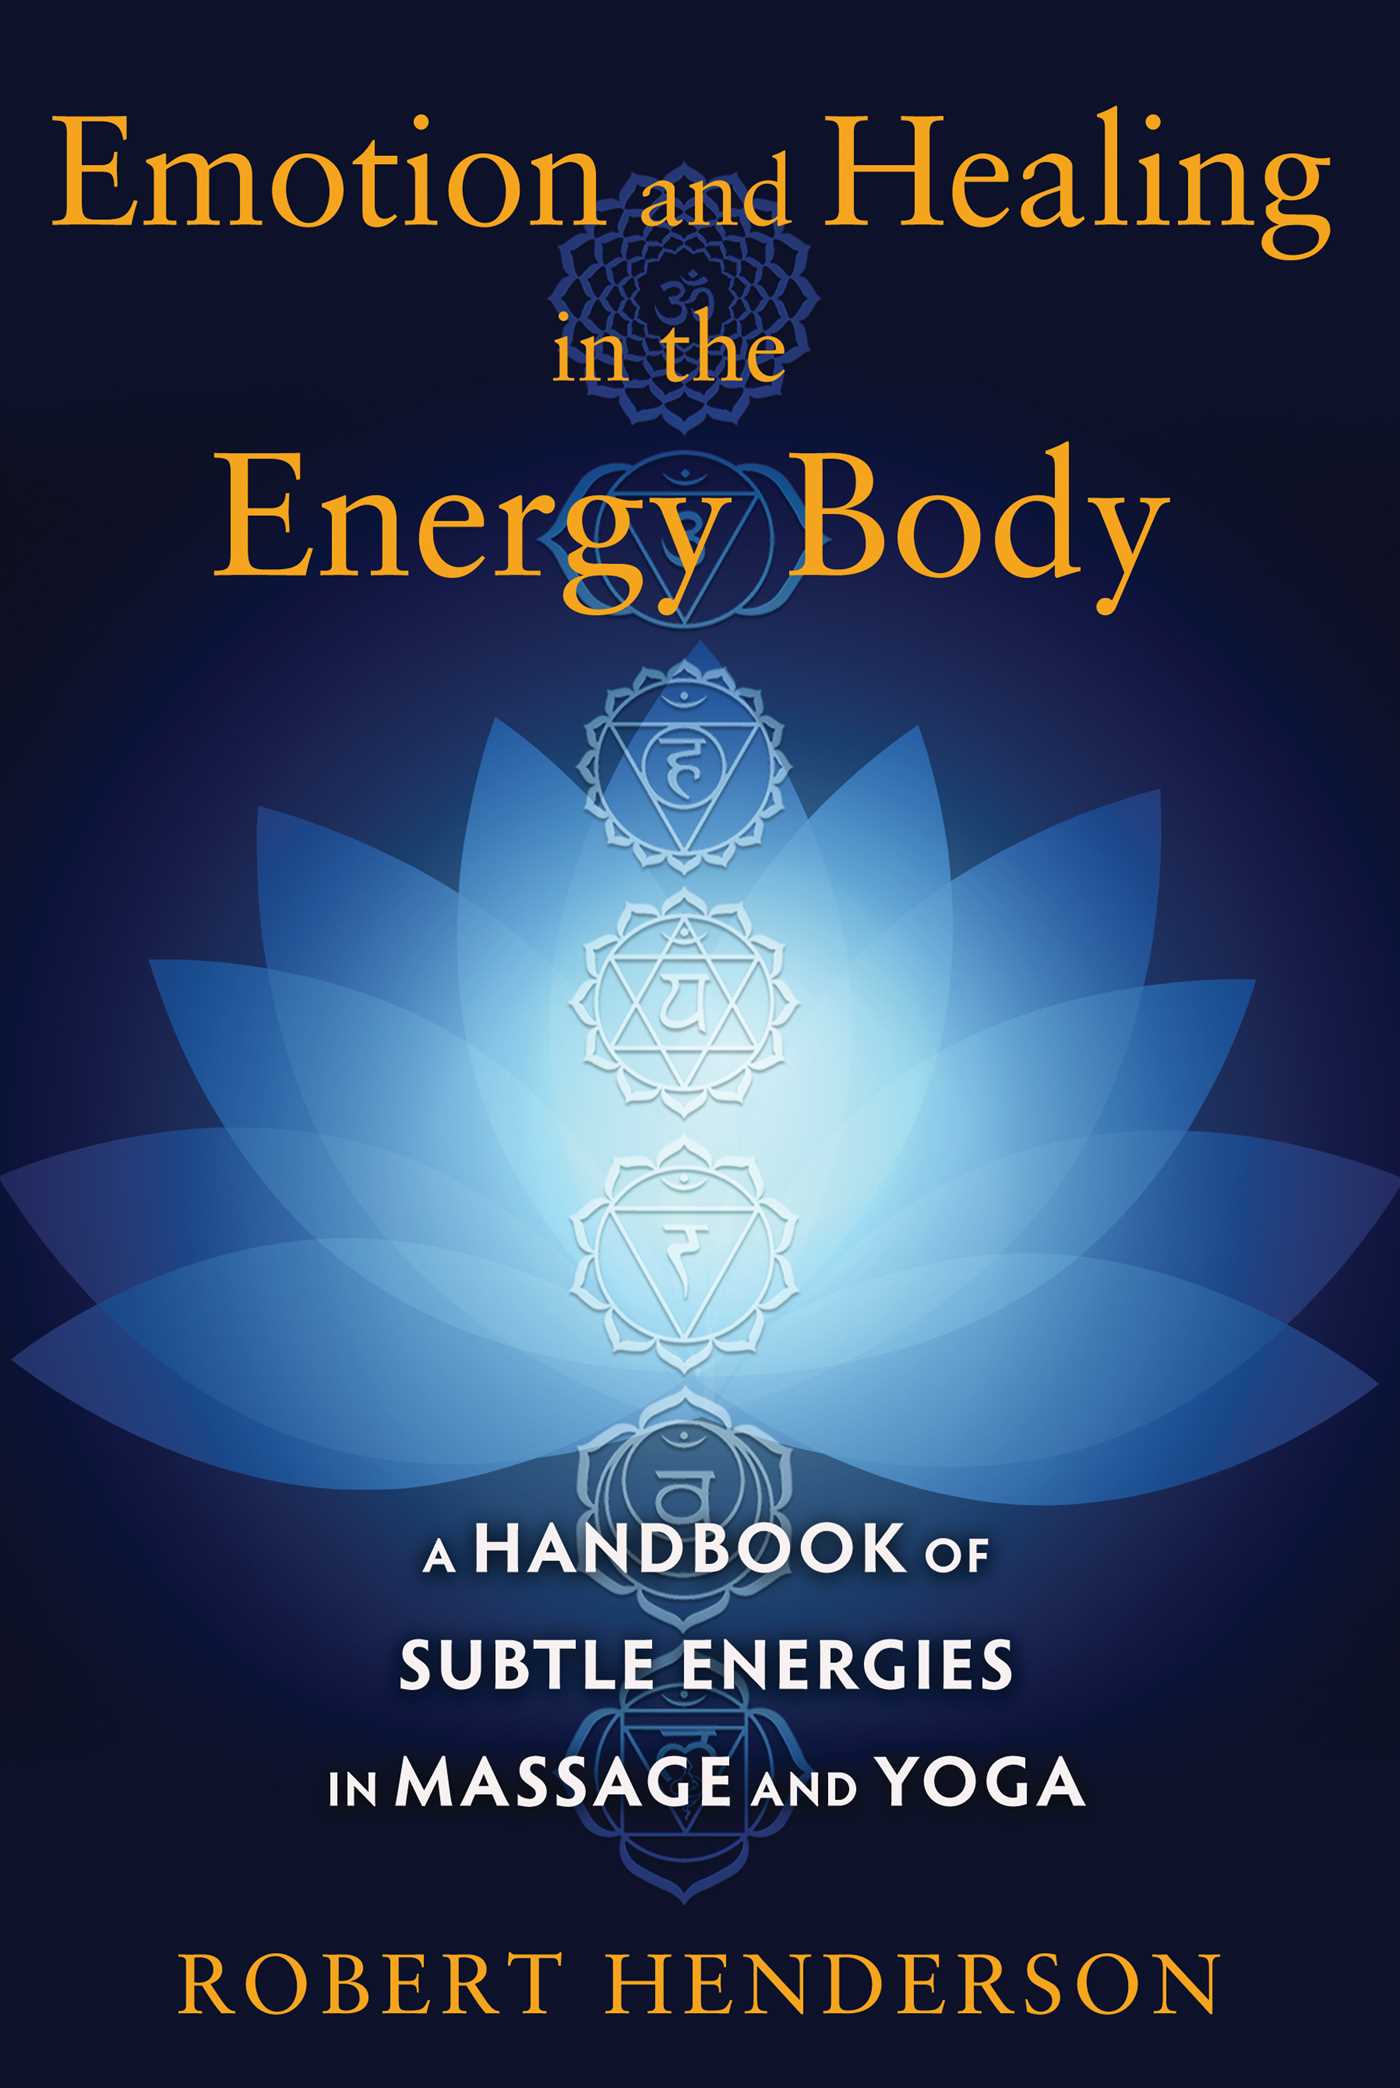 Emotion and Healing in the Energy Body | Book by Robert Henderson ...